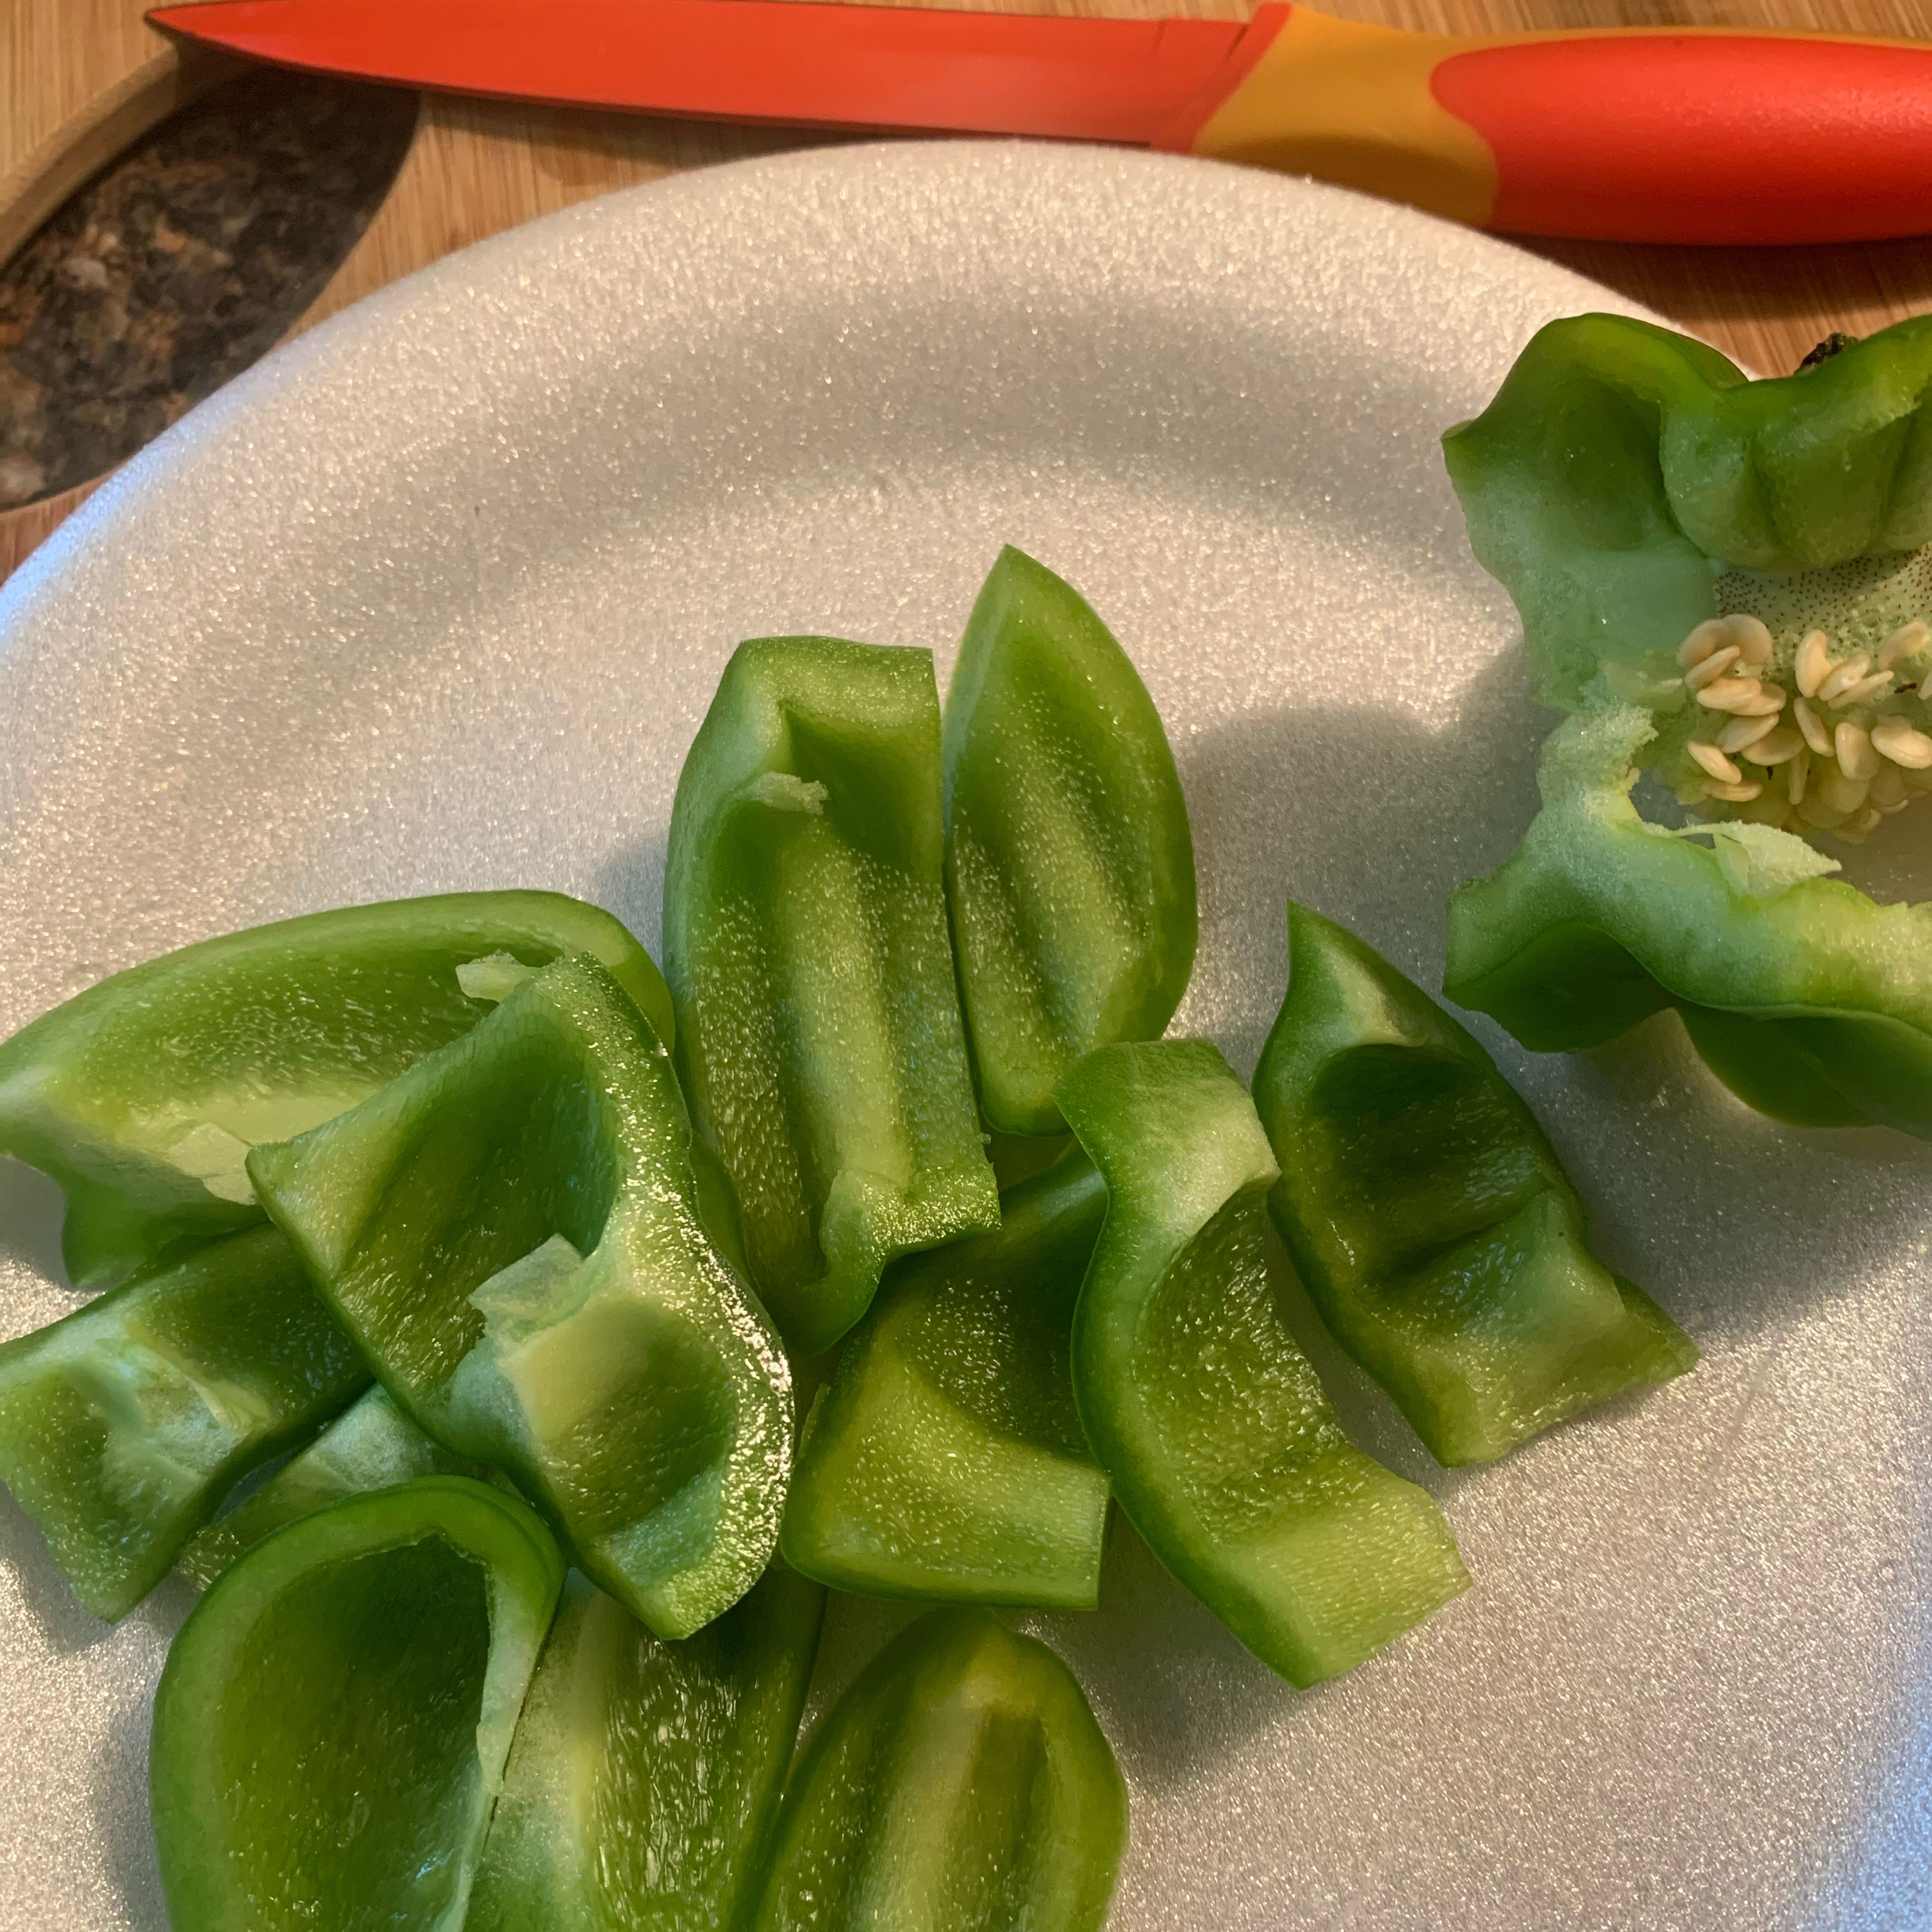 Chop bell peppers into large pieces making sure no ribs or seeds are intact and then set aside.